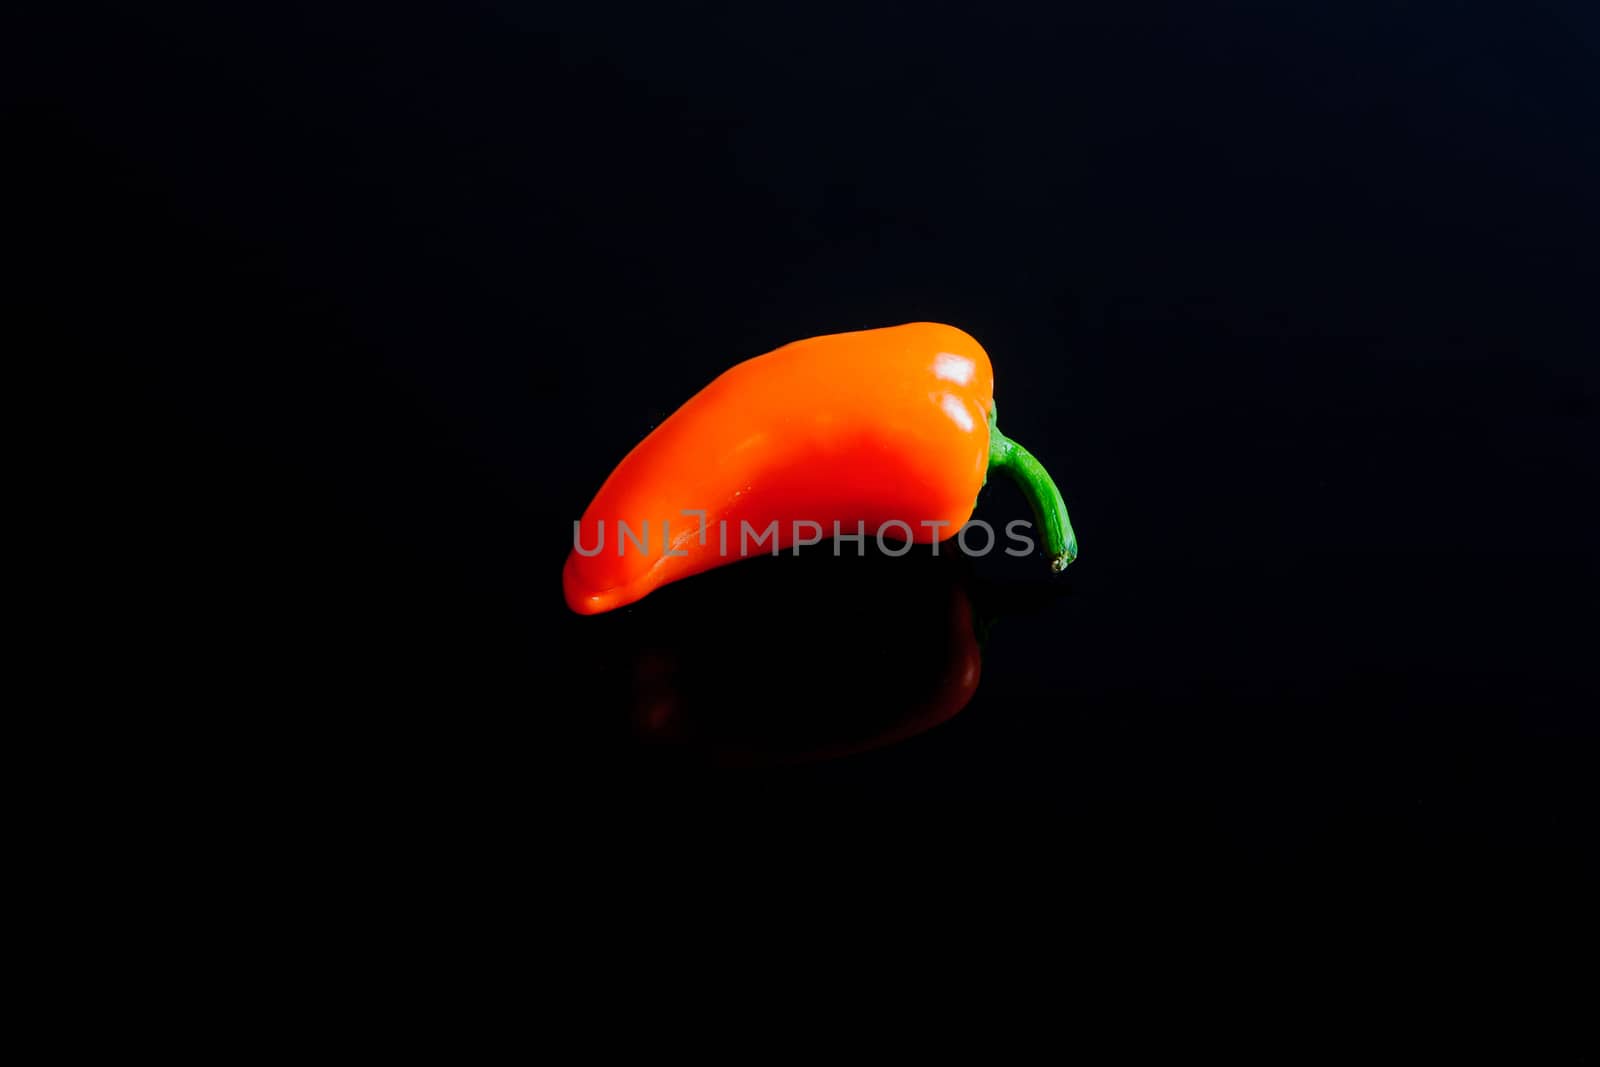 Small pepper on a black surface